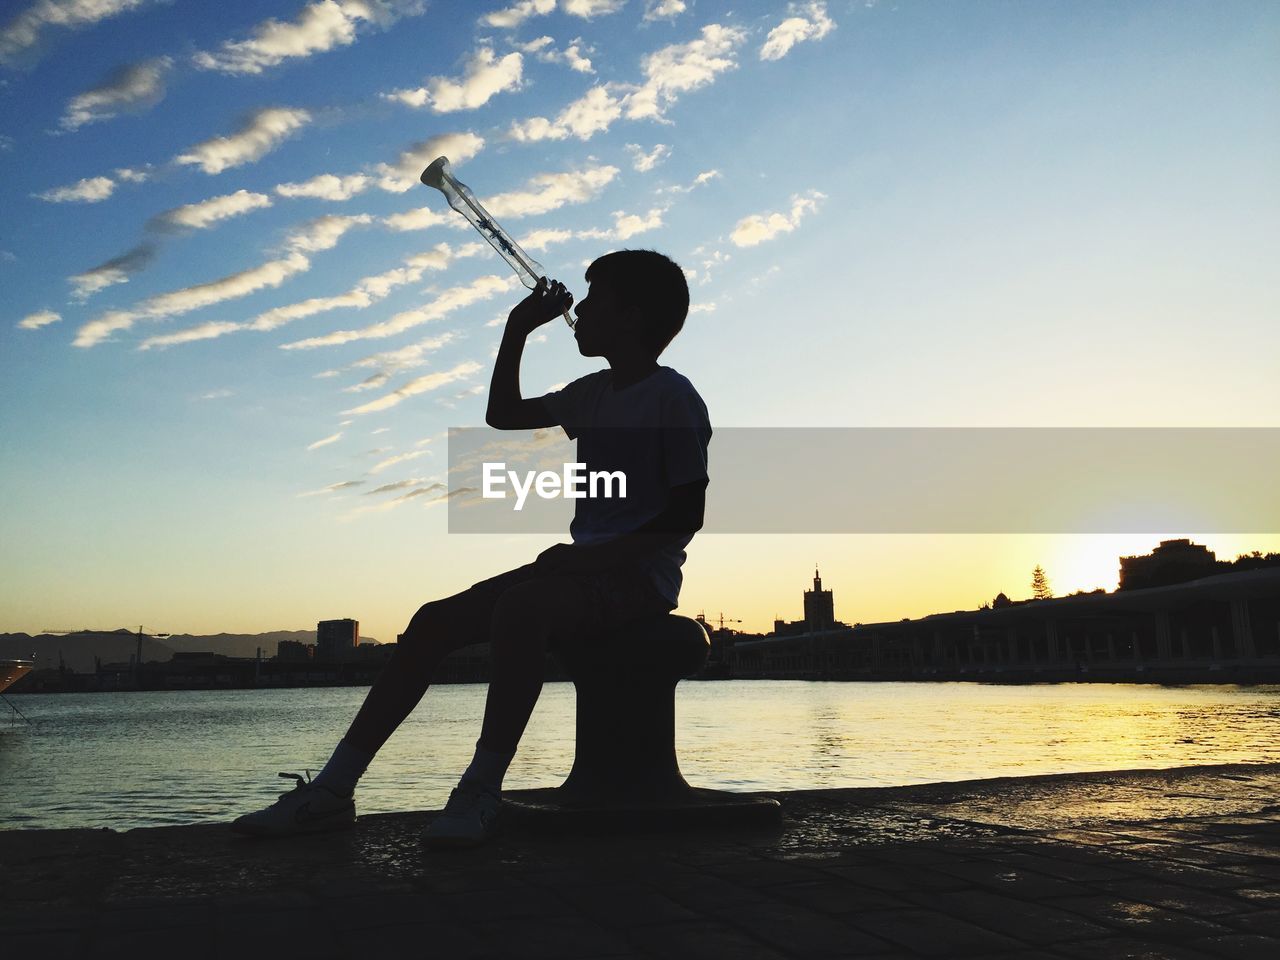 Boy with drink while sitting on bollard at pier during sunset